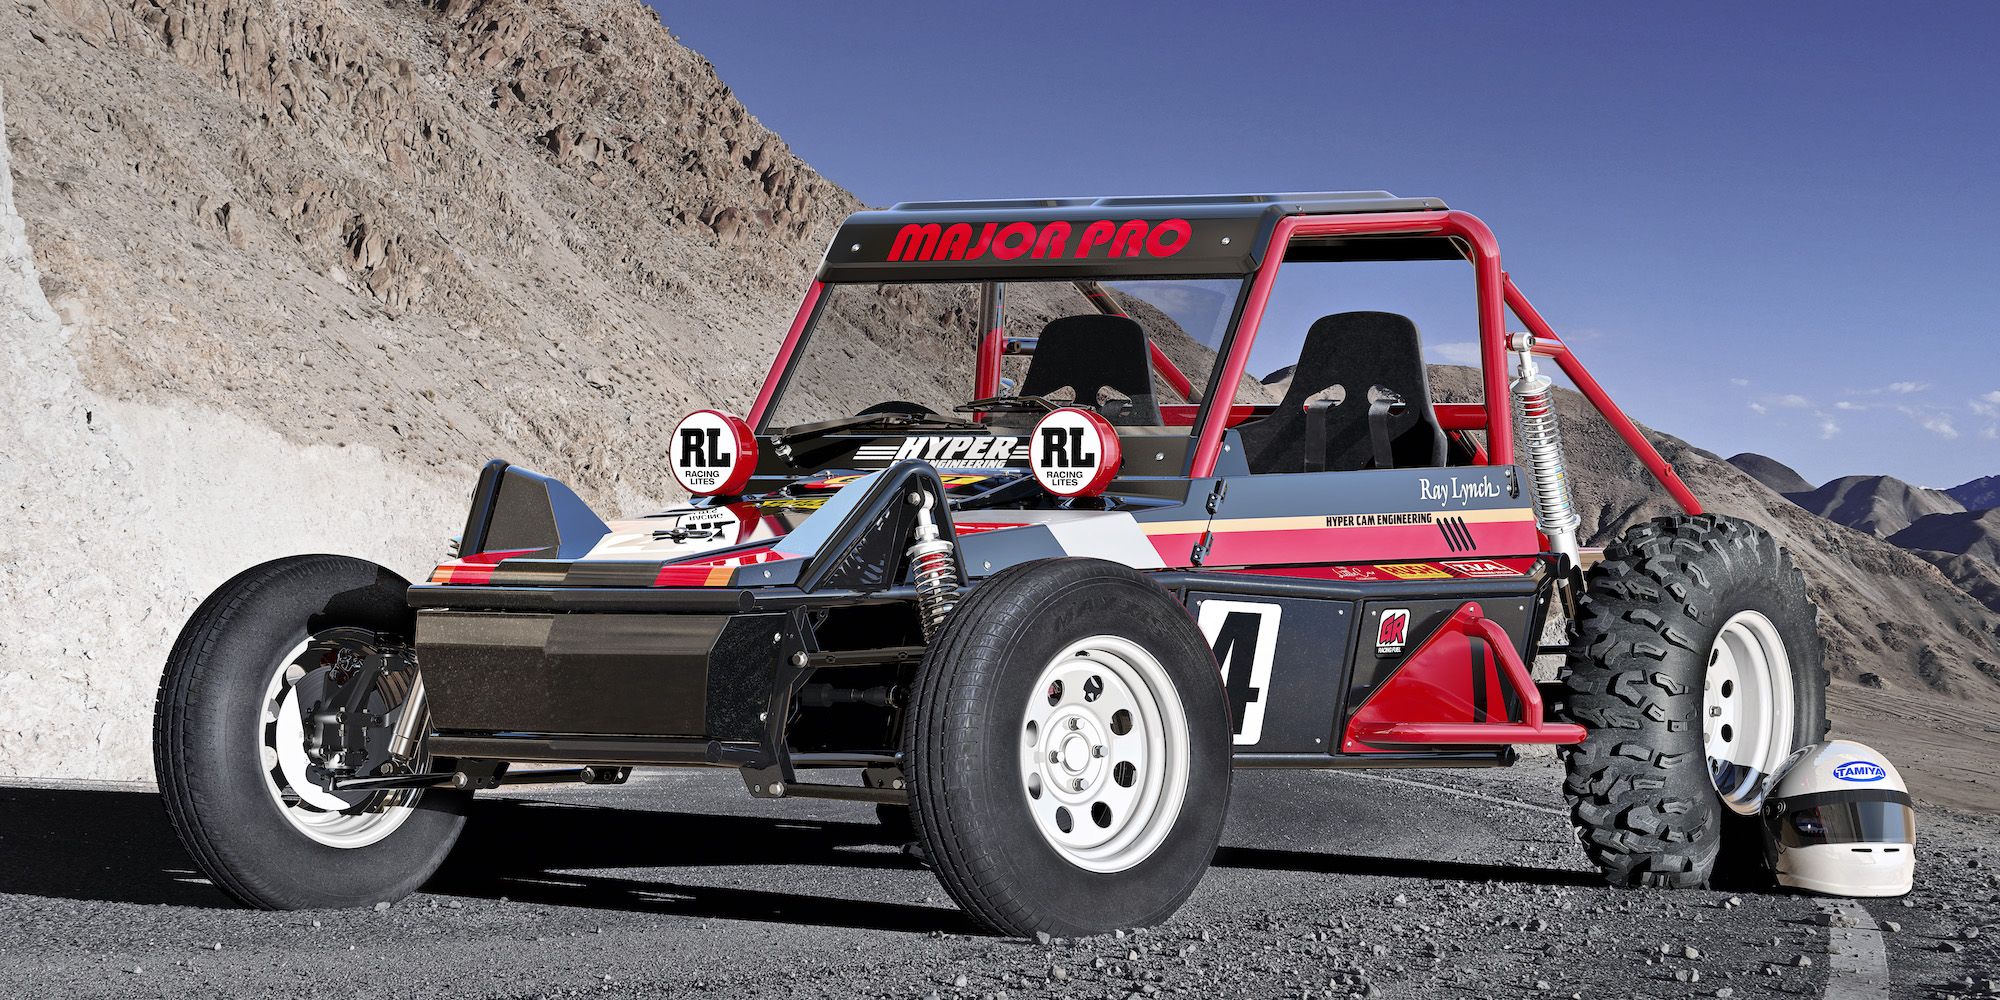 This Scaled-Up RC Car Is a Road-Legal EV